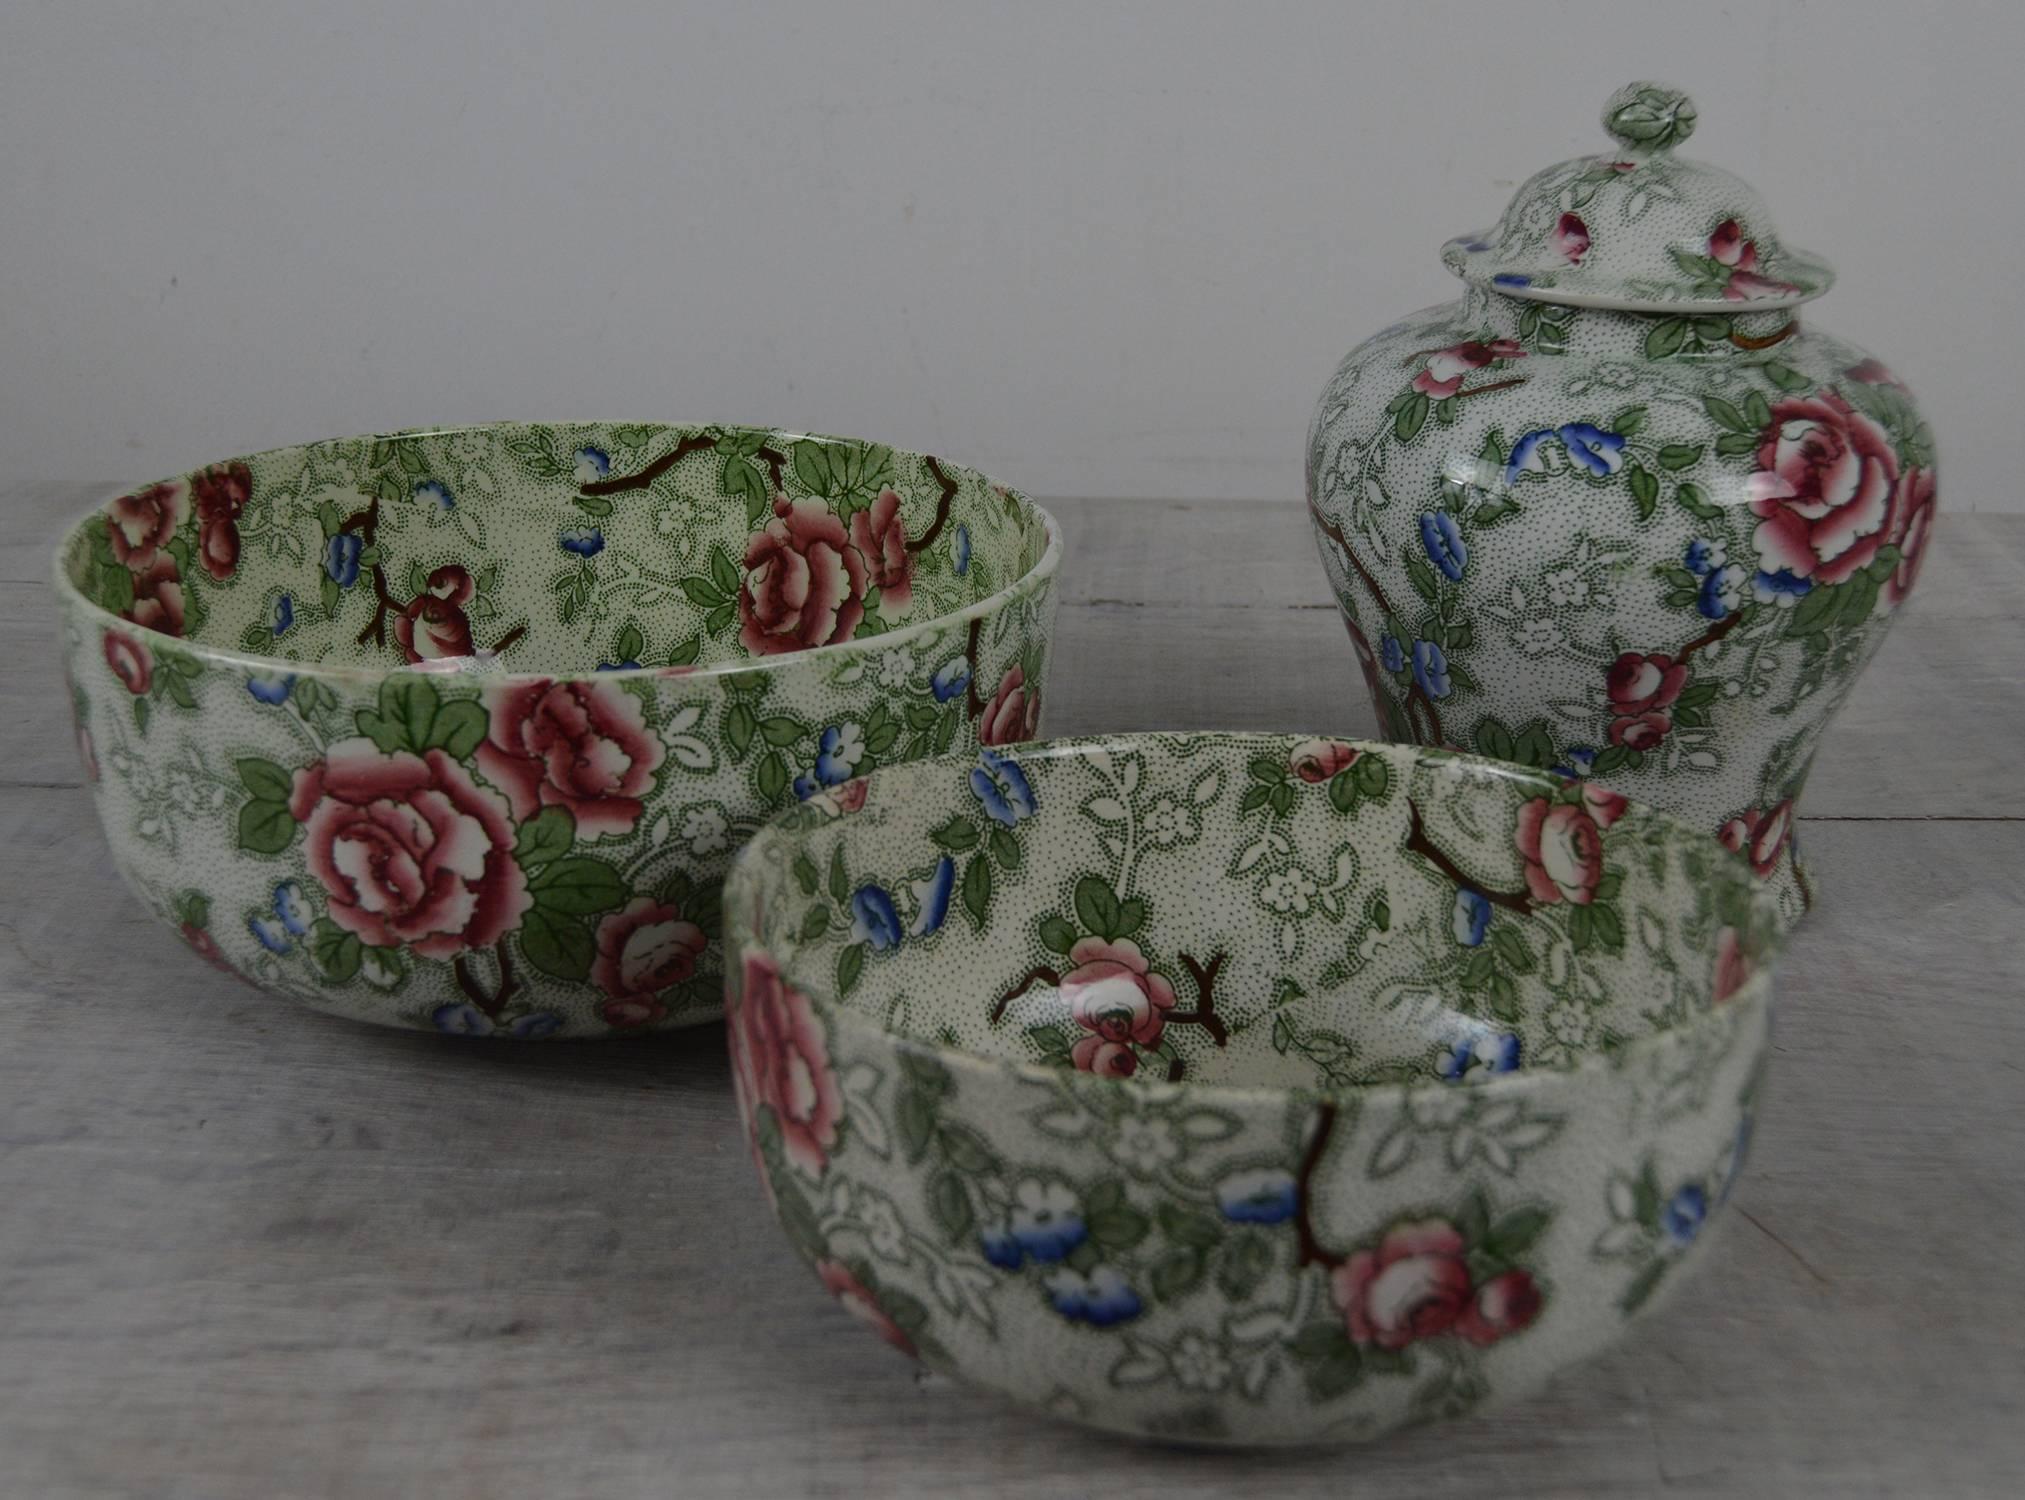 Beautifully decorated bowls and cover vase

They are in the highly desirable Chinese rose pattern.

Transfer printed and hand colored.

Two of the pieces are made be the Albion Factory and one by Leighton. Both based in Staffordshire,